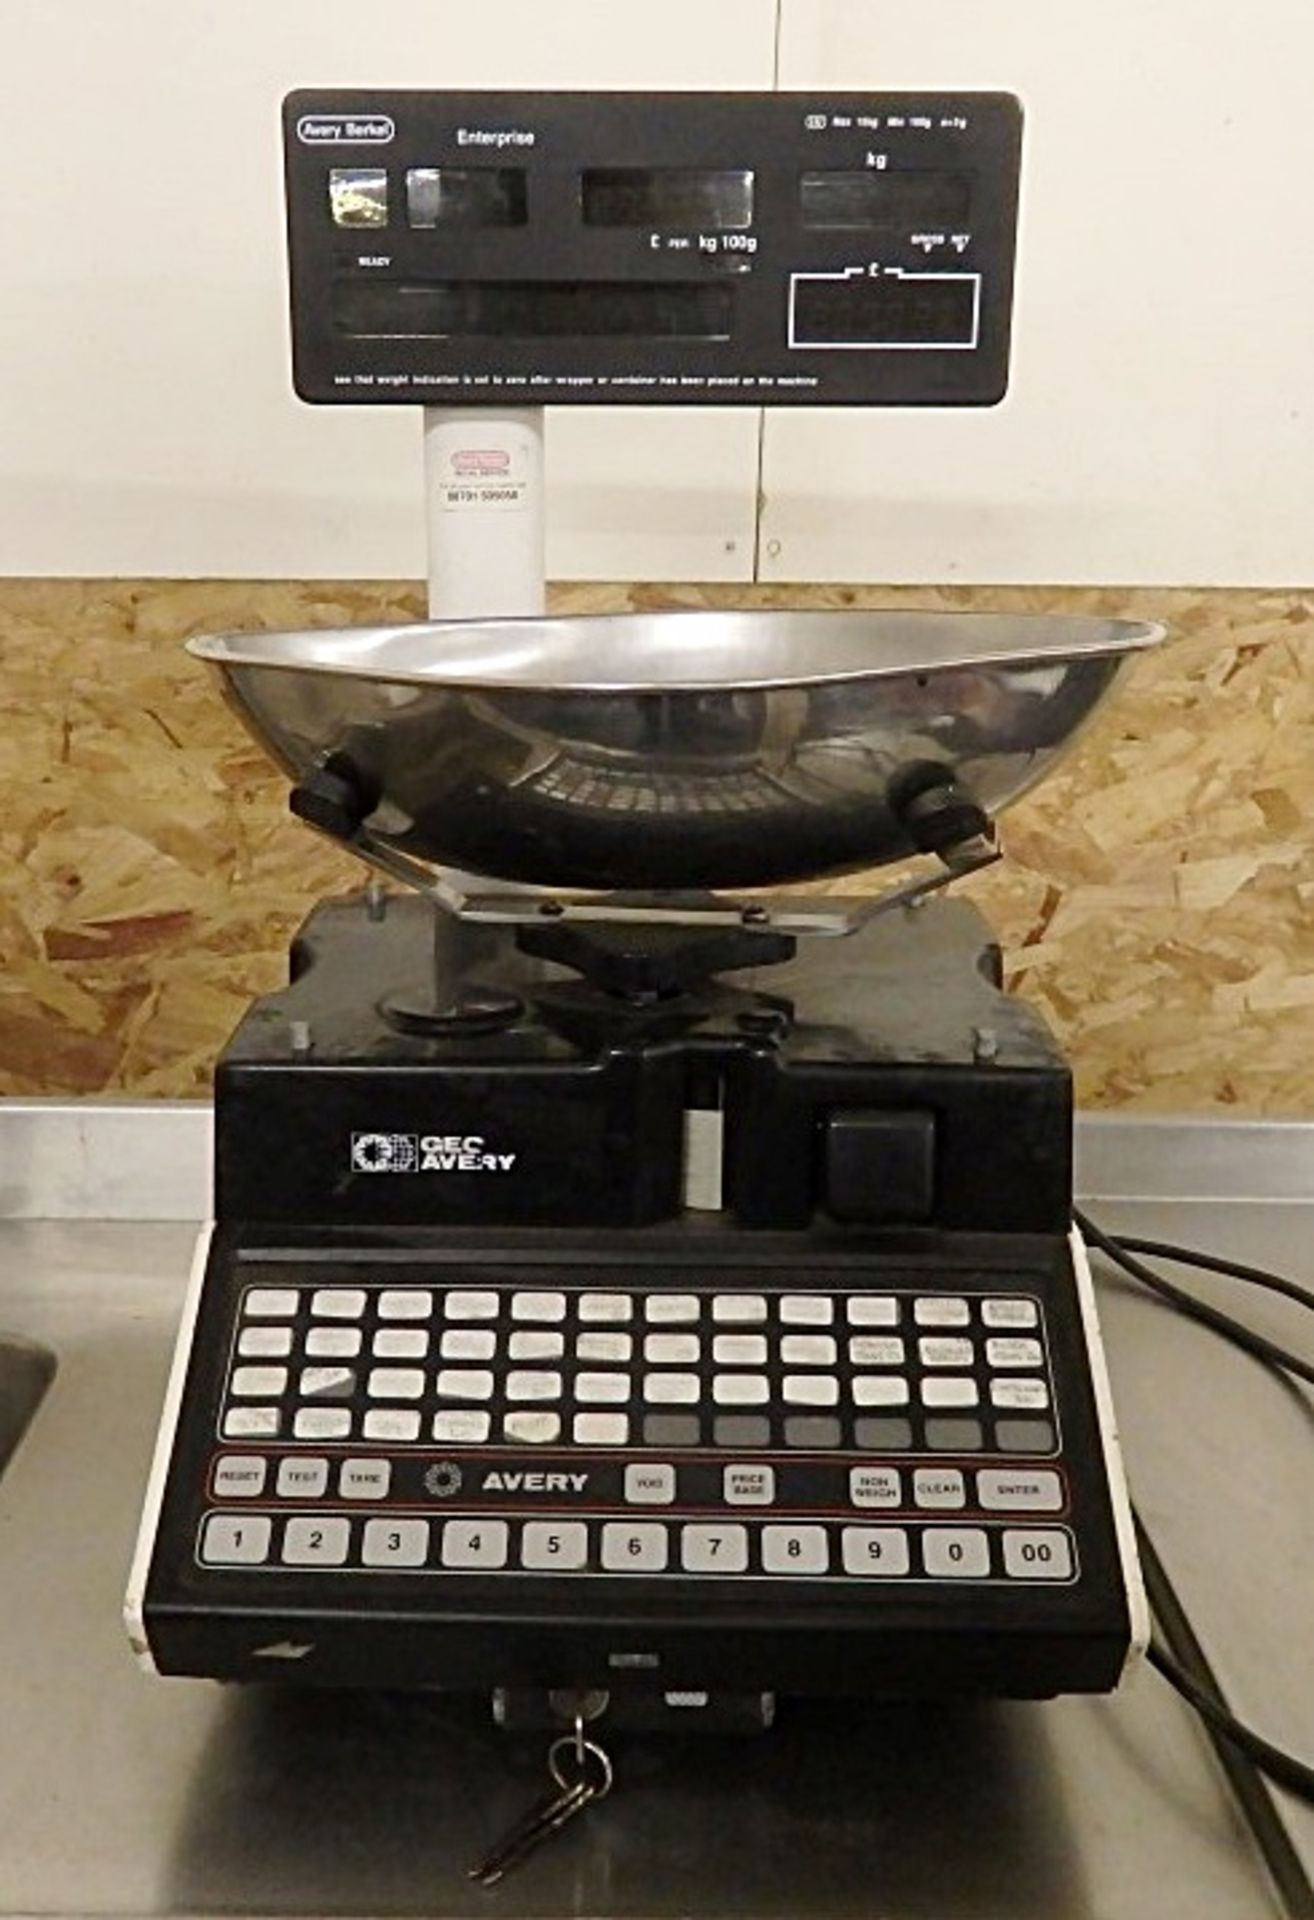 1 x Avery Veg Scales - Presented In Good Condition - Dimensions: H60 x D46 x W34cm - Ref: M071 -